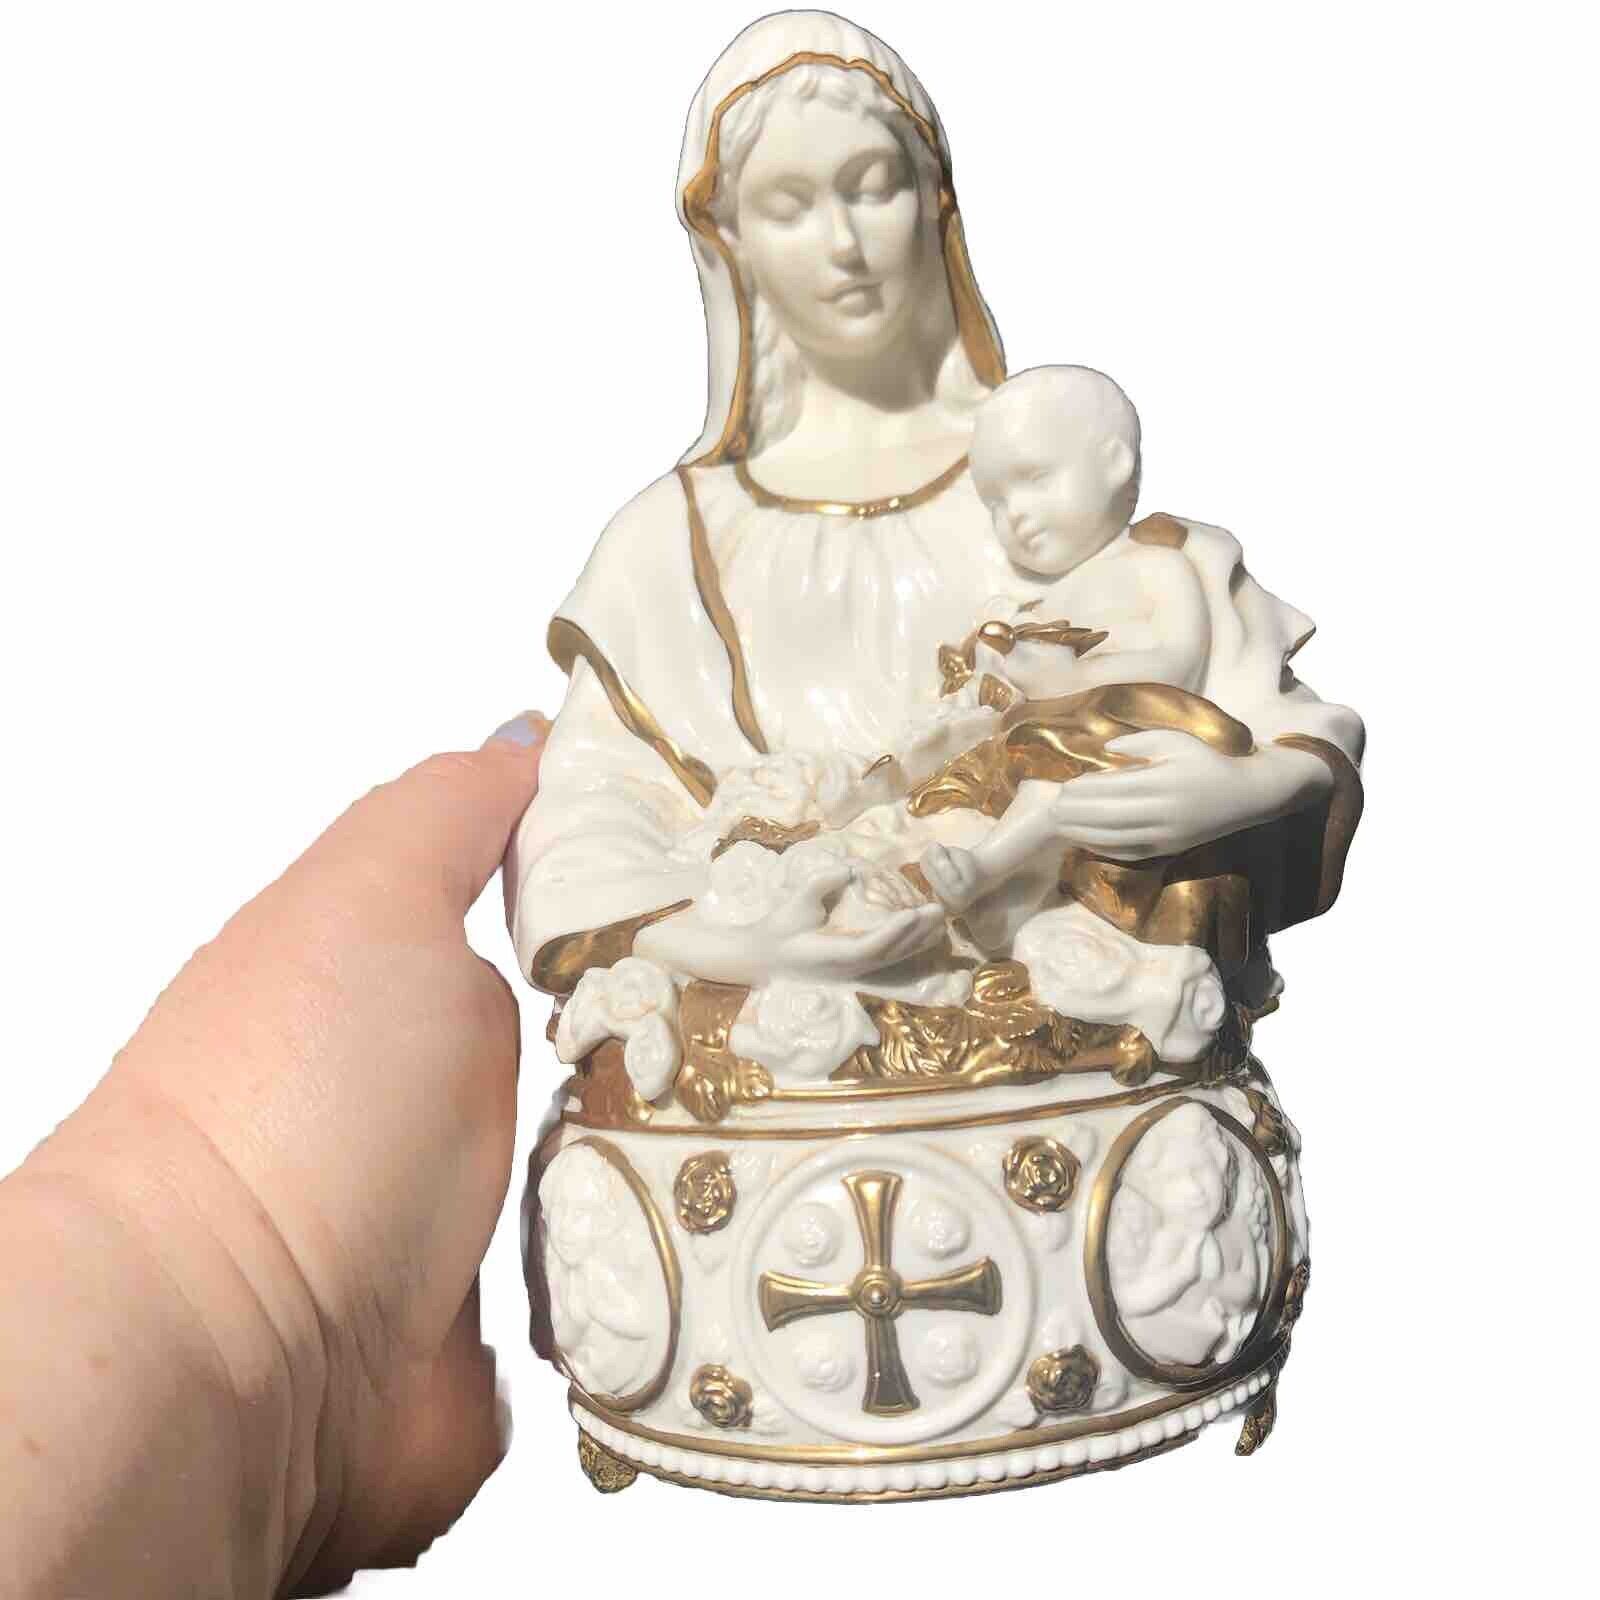 Franklin Mint Hand Painted Porcelain Madonna and Christ-child Figurine. Music